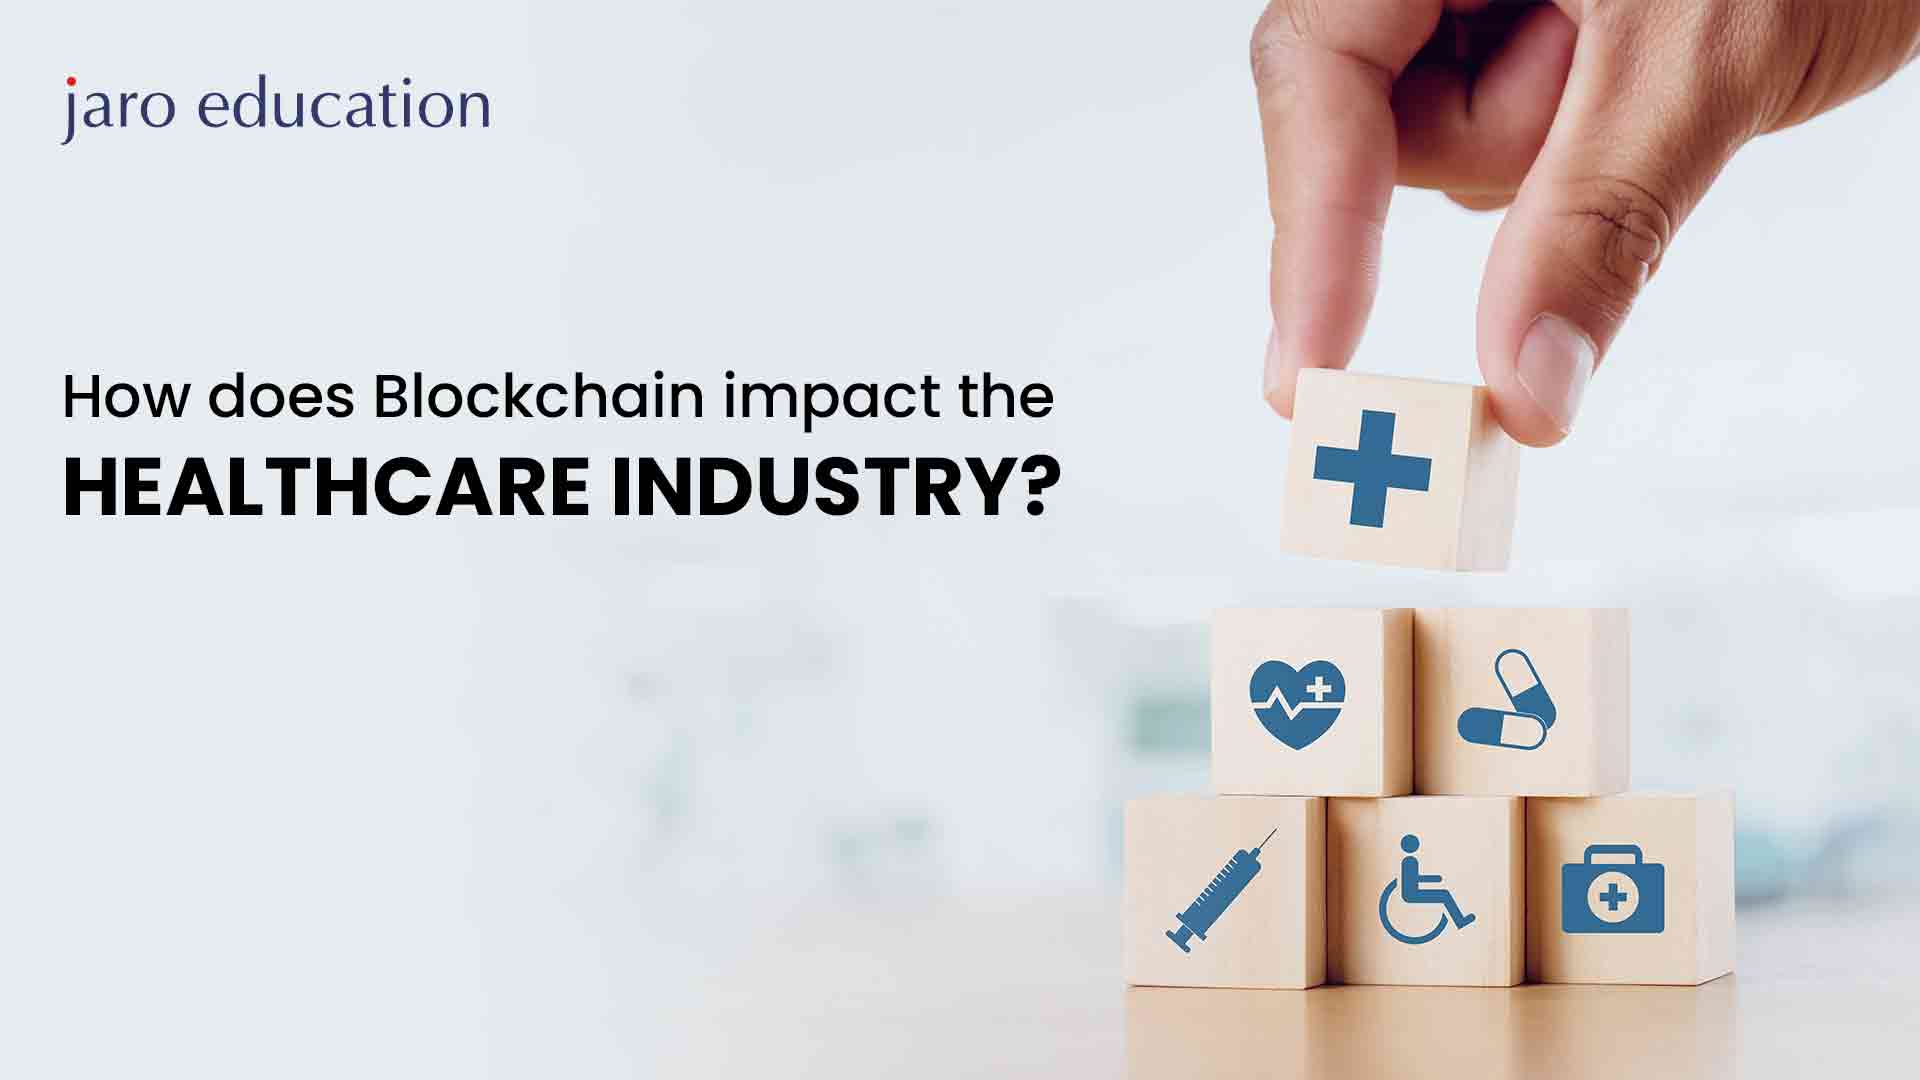 How does Blockchain impact the Healthcare Industry